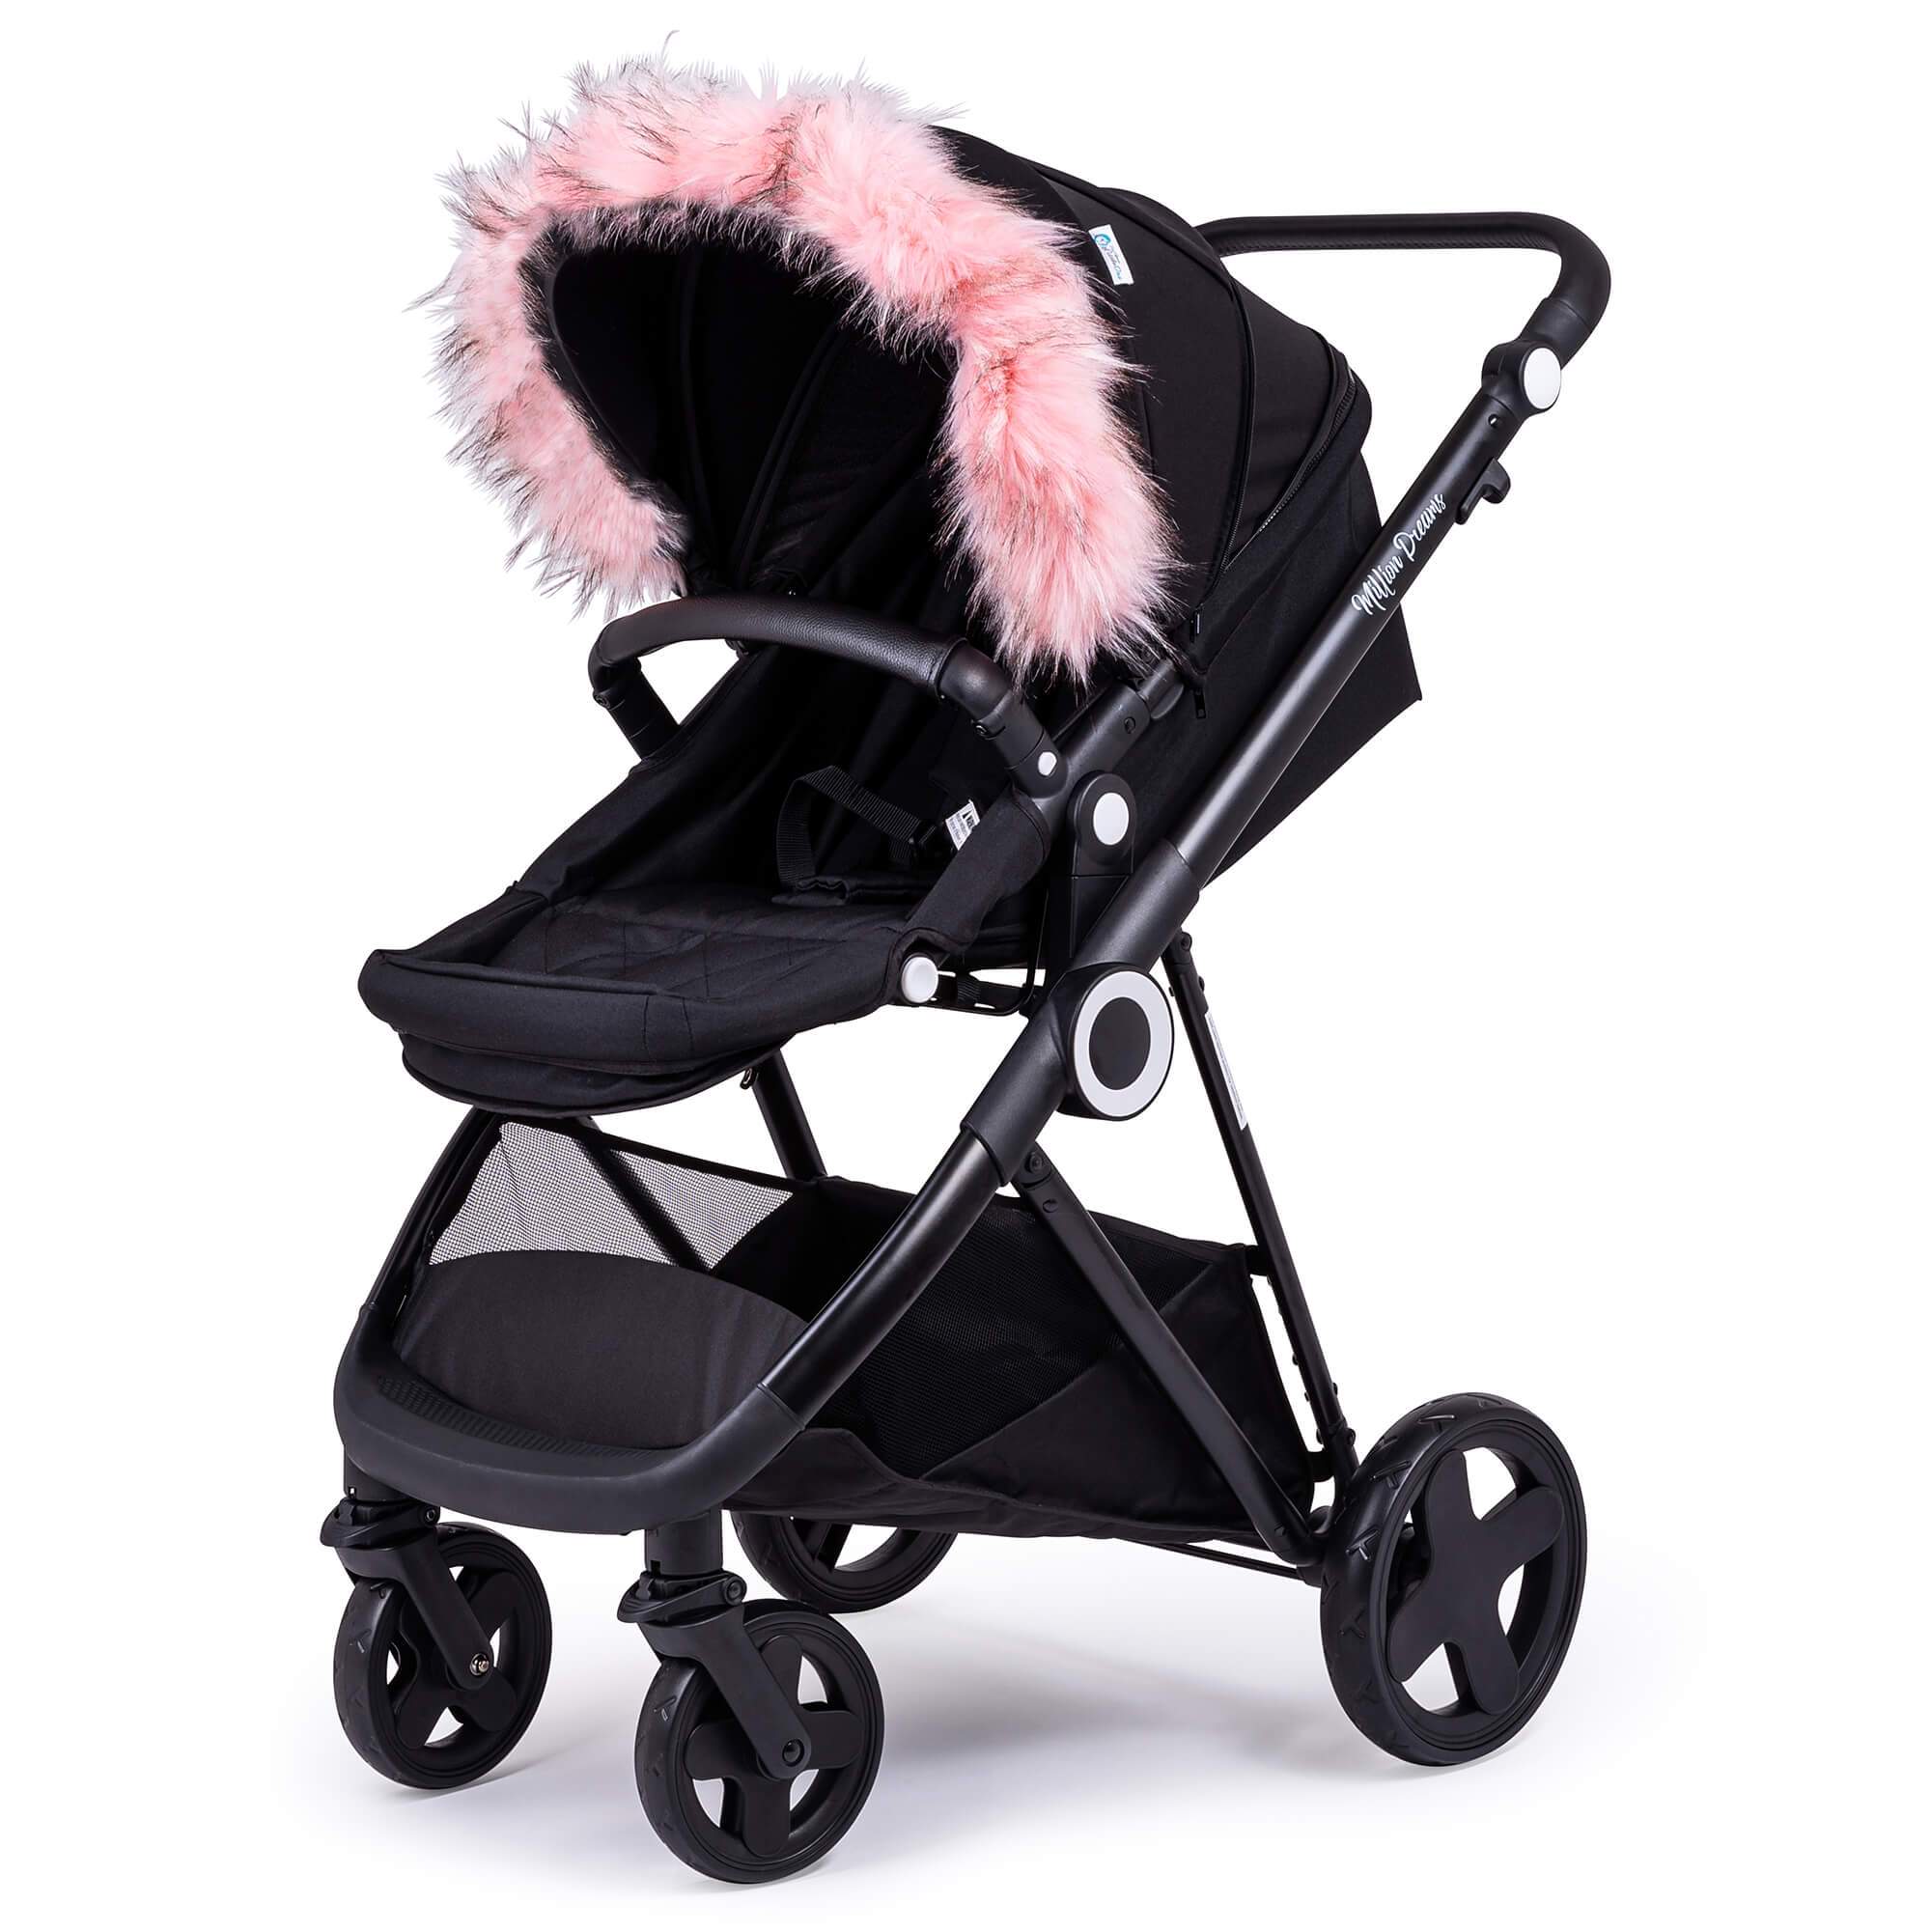 Pram Fur Hood Trim Attachment for Pushchair Compatible with iCandy - Light Pink / Fits All Models | For Your Little One